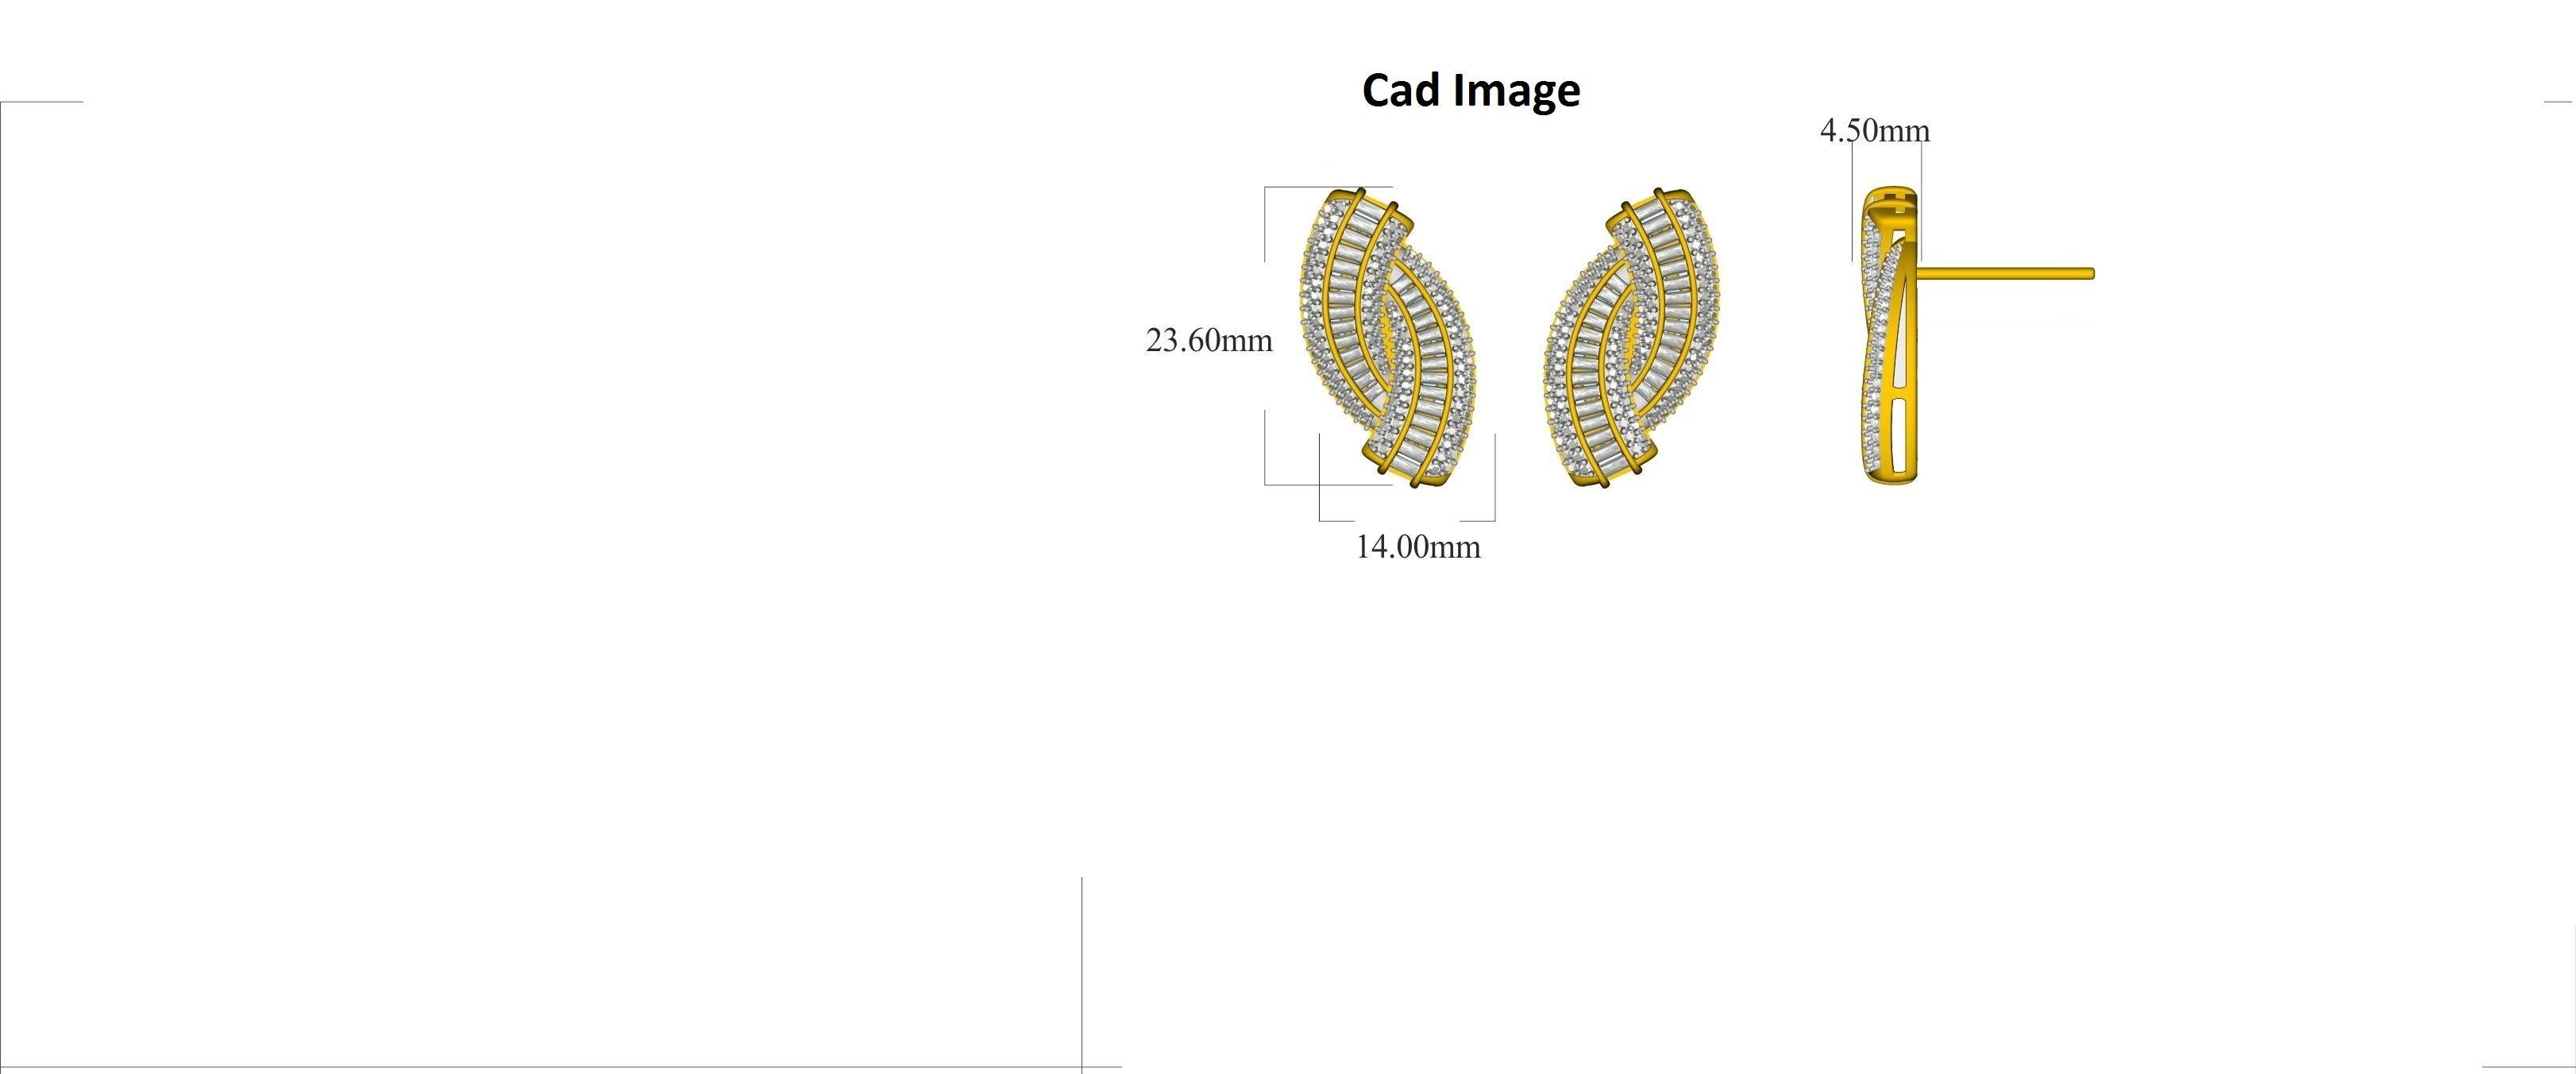 14 Karat Yellow Gold entangle Diamond Stud Earrings With 240 Round Brilliant and 56 baguette-cut Diamond drop earrings have 2.00 Carats of Round Brilliant set in pave and channel setting, H-I color I2 clarity. These sparkling stud earrings secure